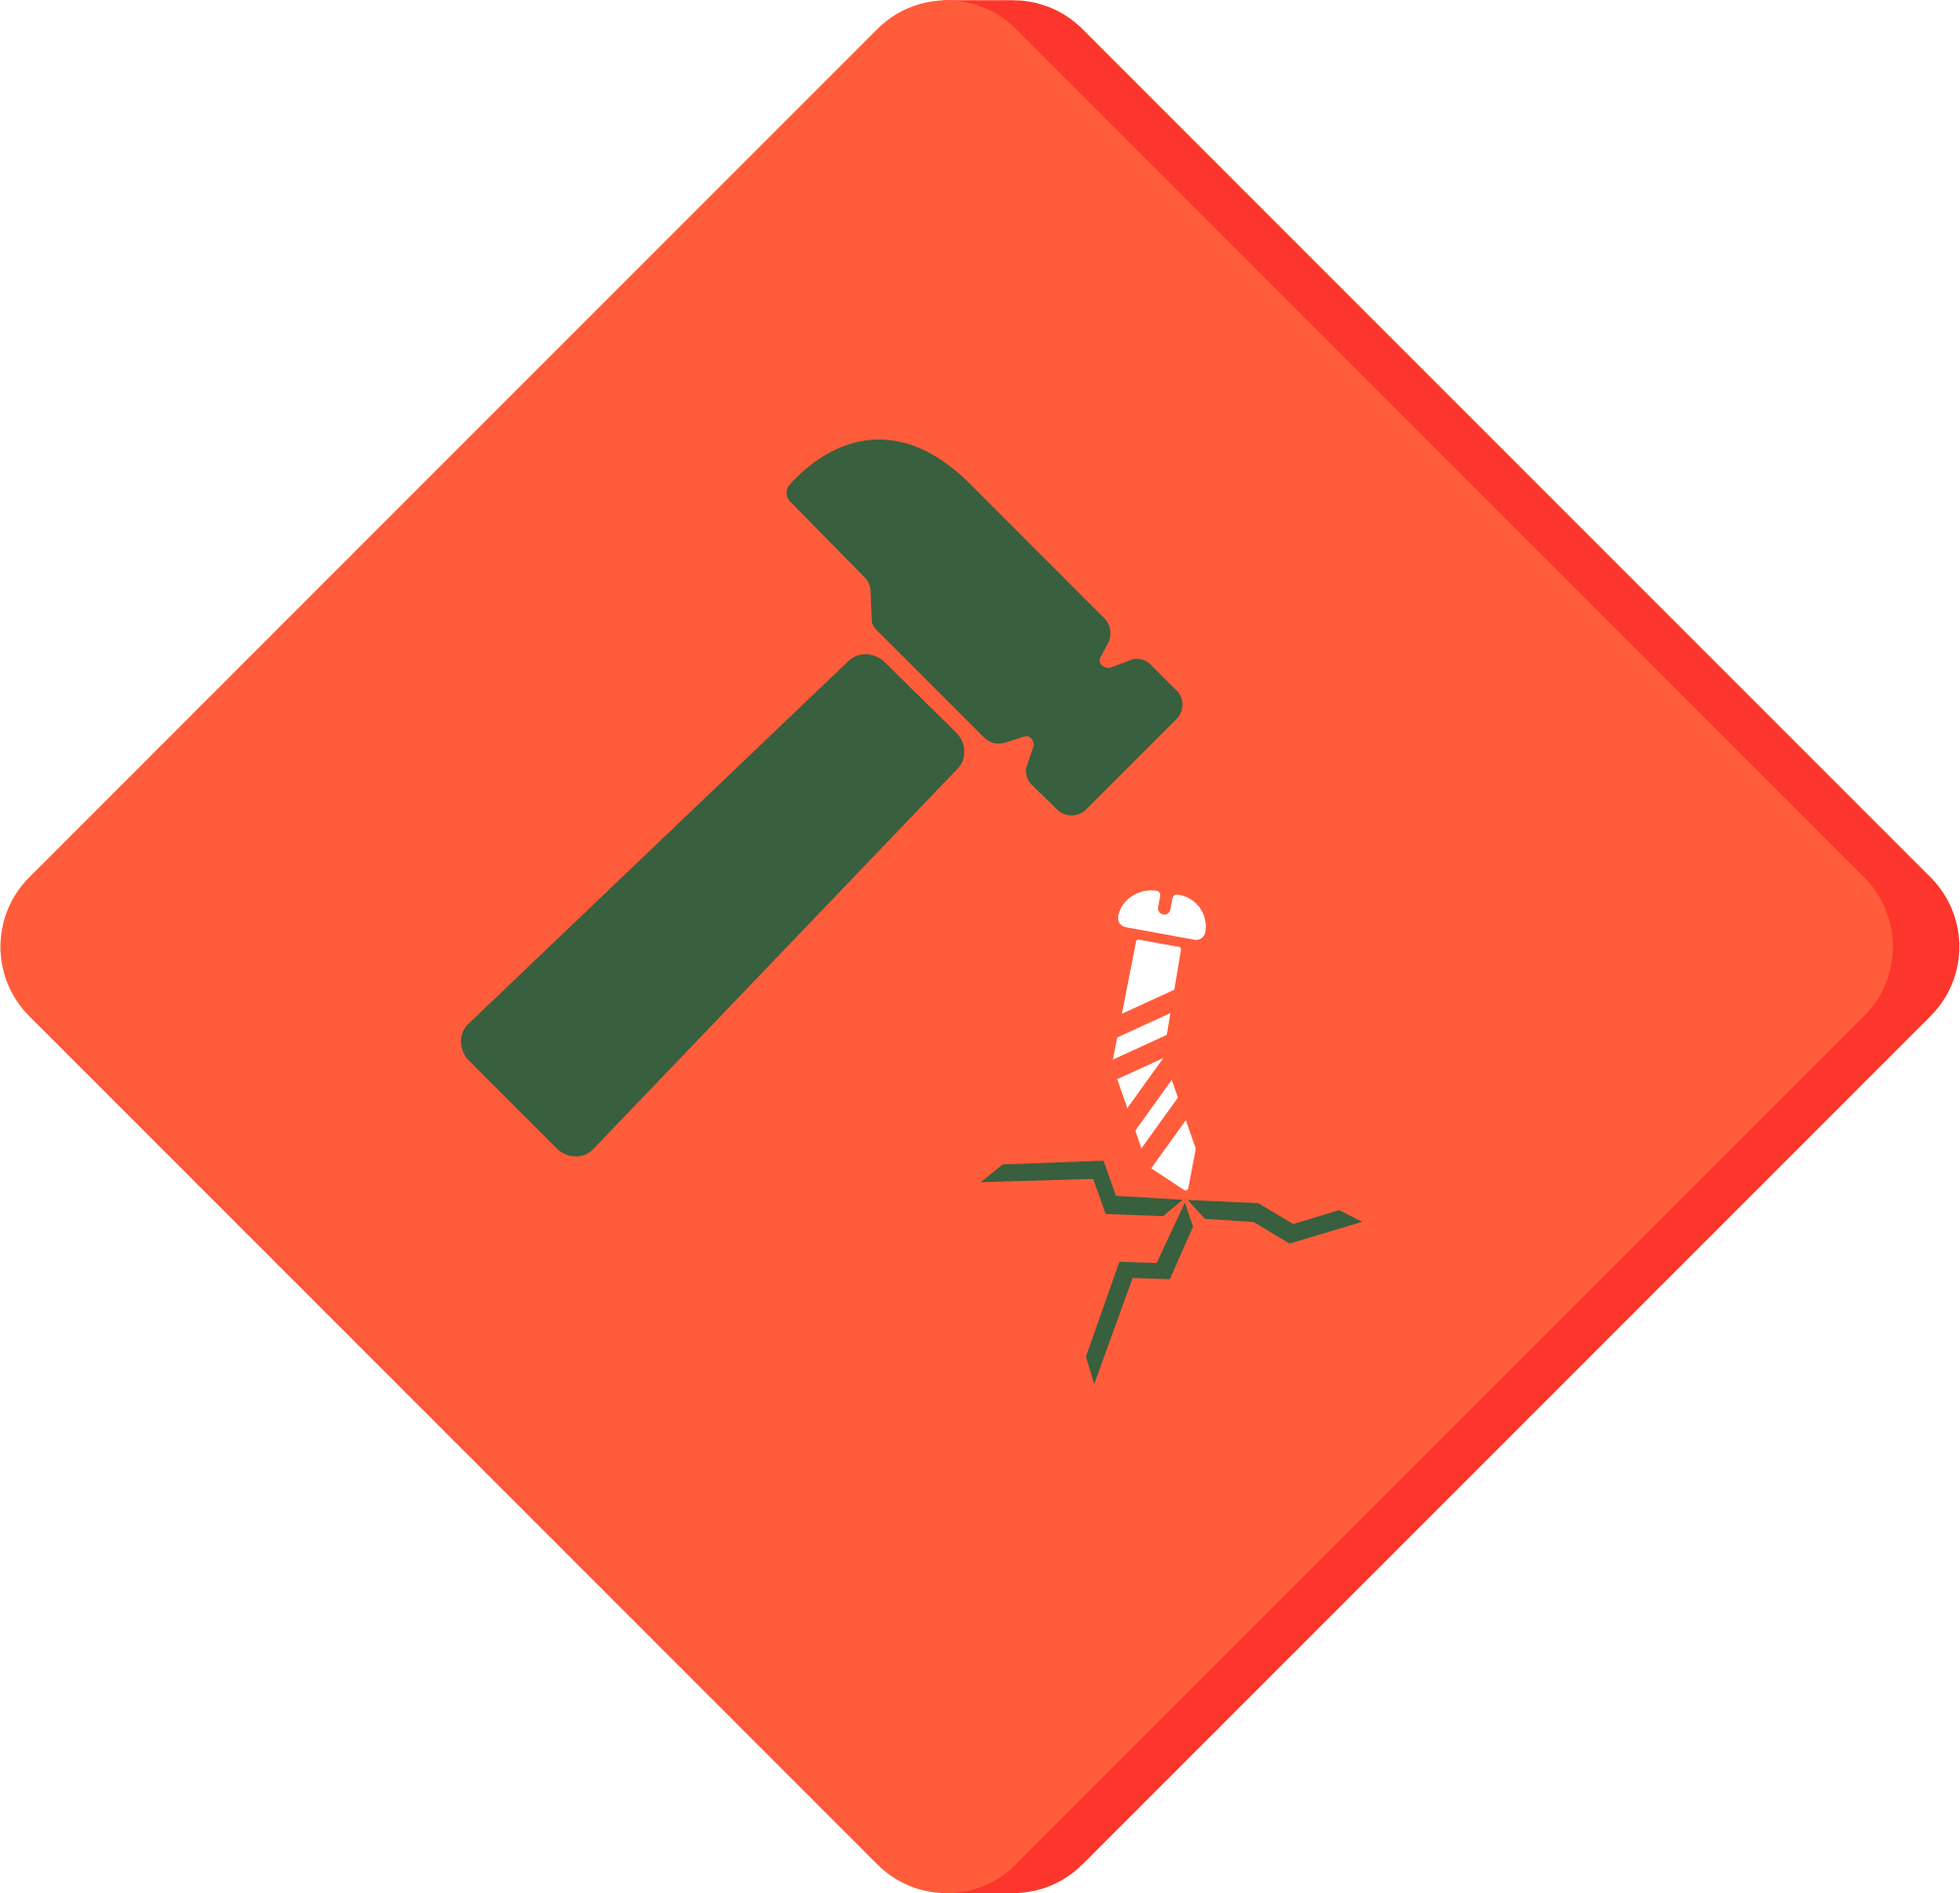 A red diamond shaped outline (like a warning sign) with a hammer raised above a screw in the middle.